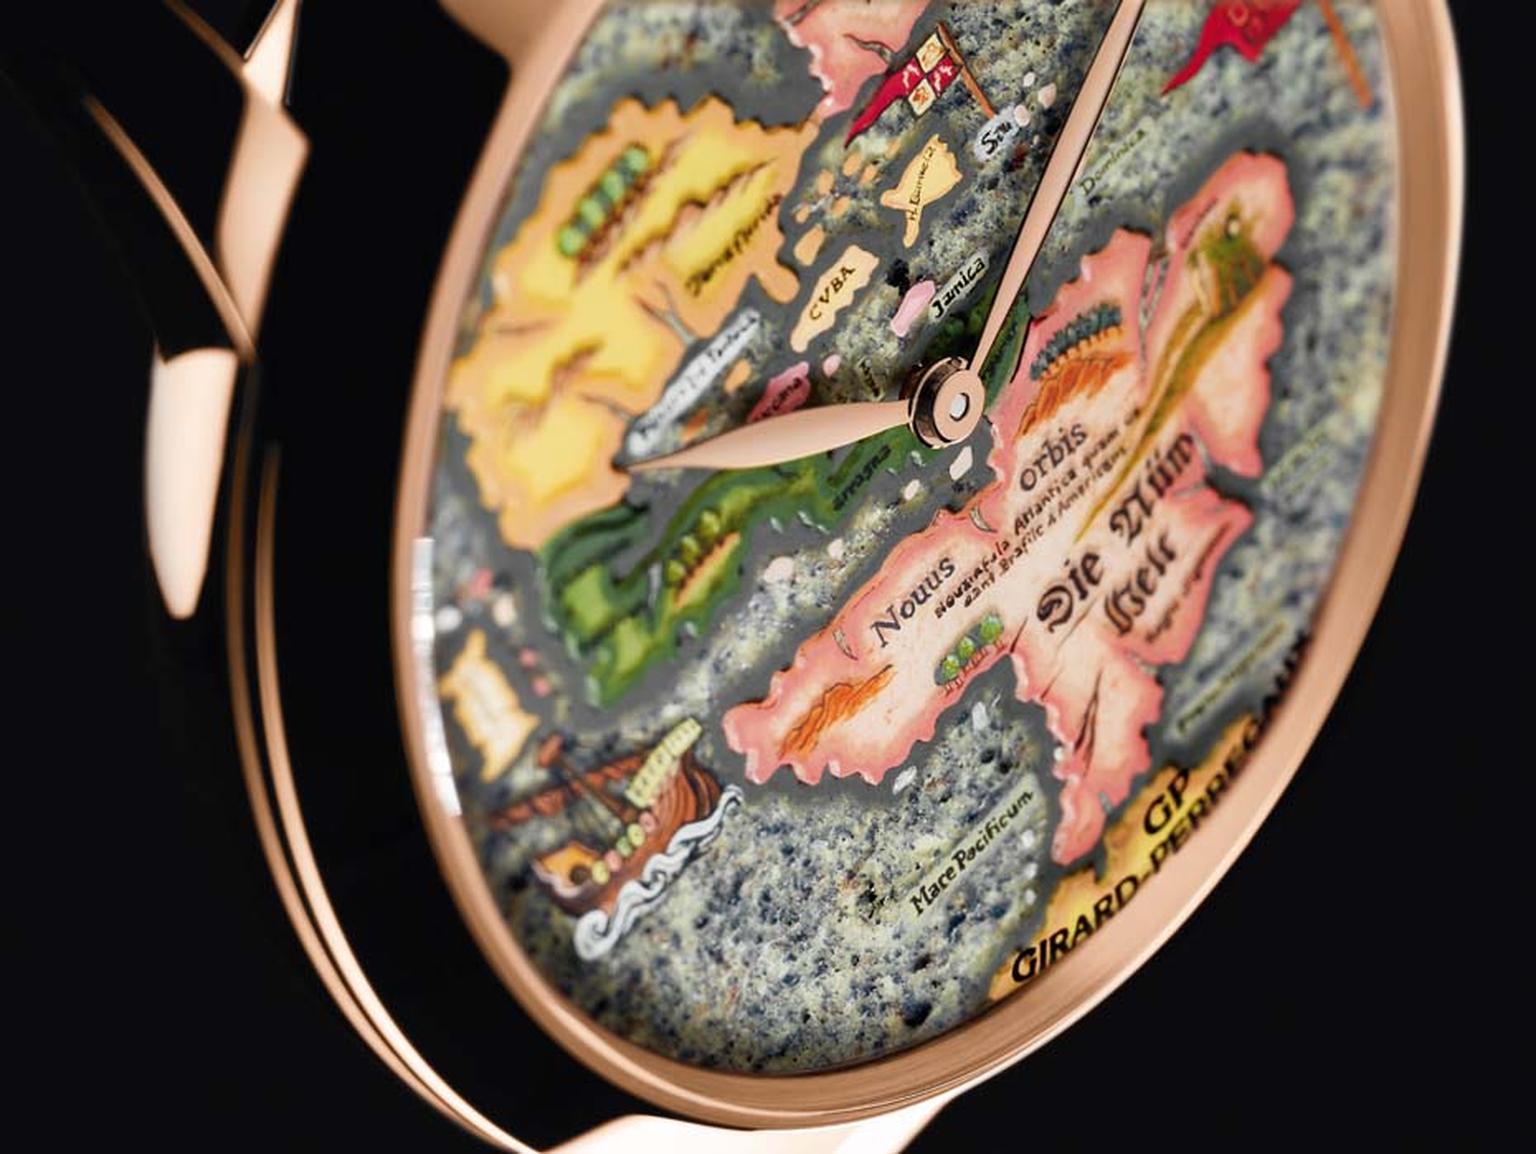 All the Girard-Perregaux Chambers of Wonders rose gold watches are housed in an elegant Girard-Perregaux 1966 40mm case, which frames the beauty of the dial without deflecting attention from the exquisitely crafted maps.